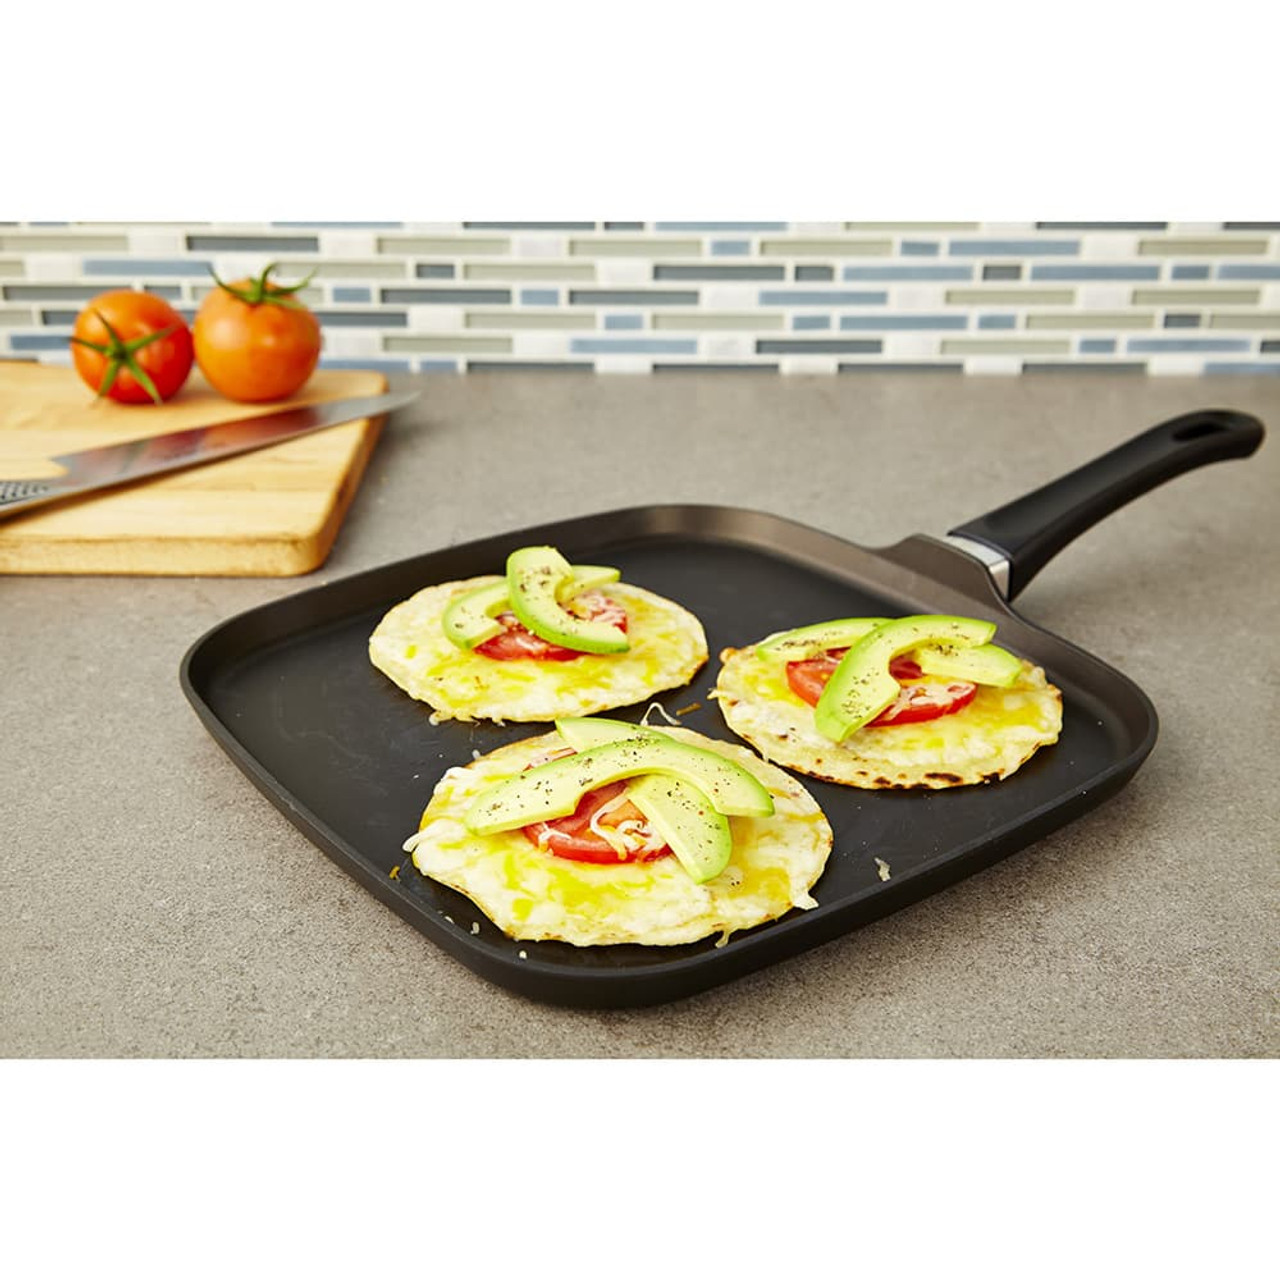 https://cdn11.bigcommerce.com/s-hccytny0od/images/stencil/1280x1280/products/2376/8005/scanpan-classic-griddle-2__31432.1552989069.jpg?c=2?imbypass=on